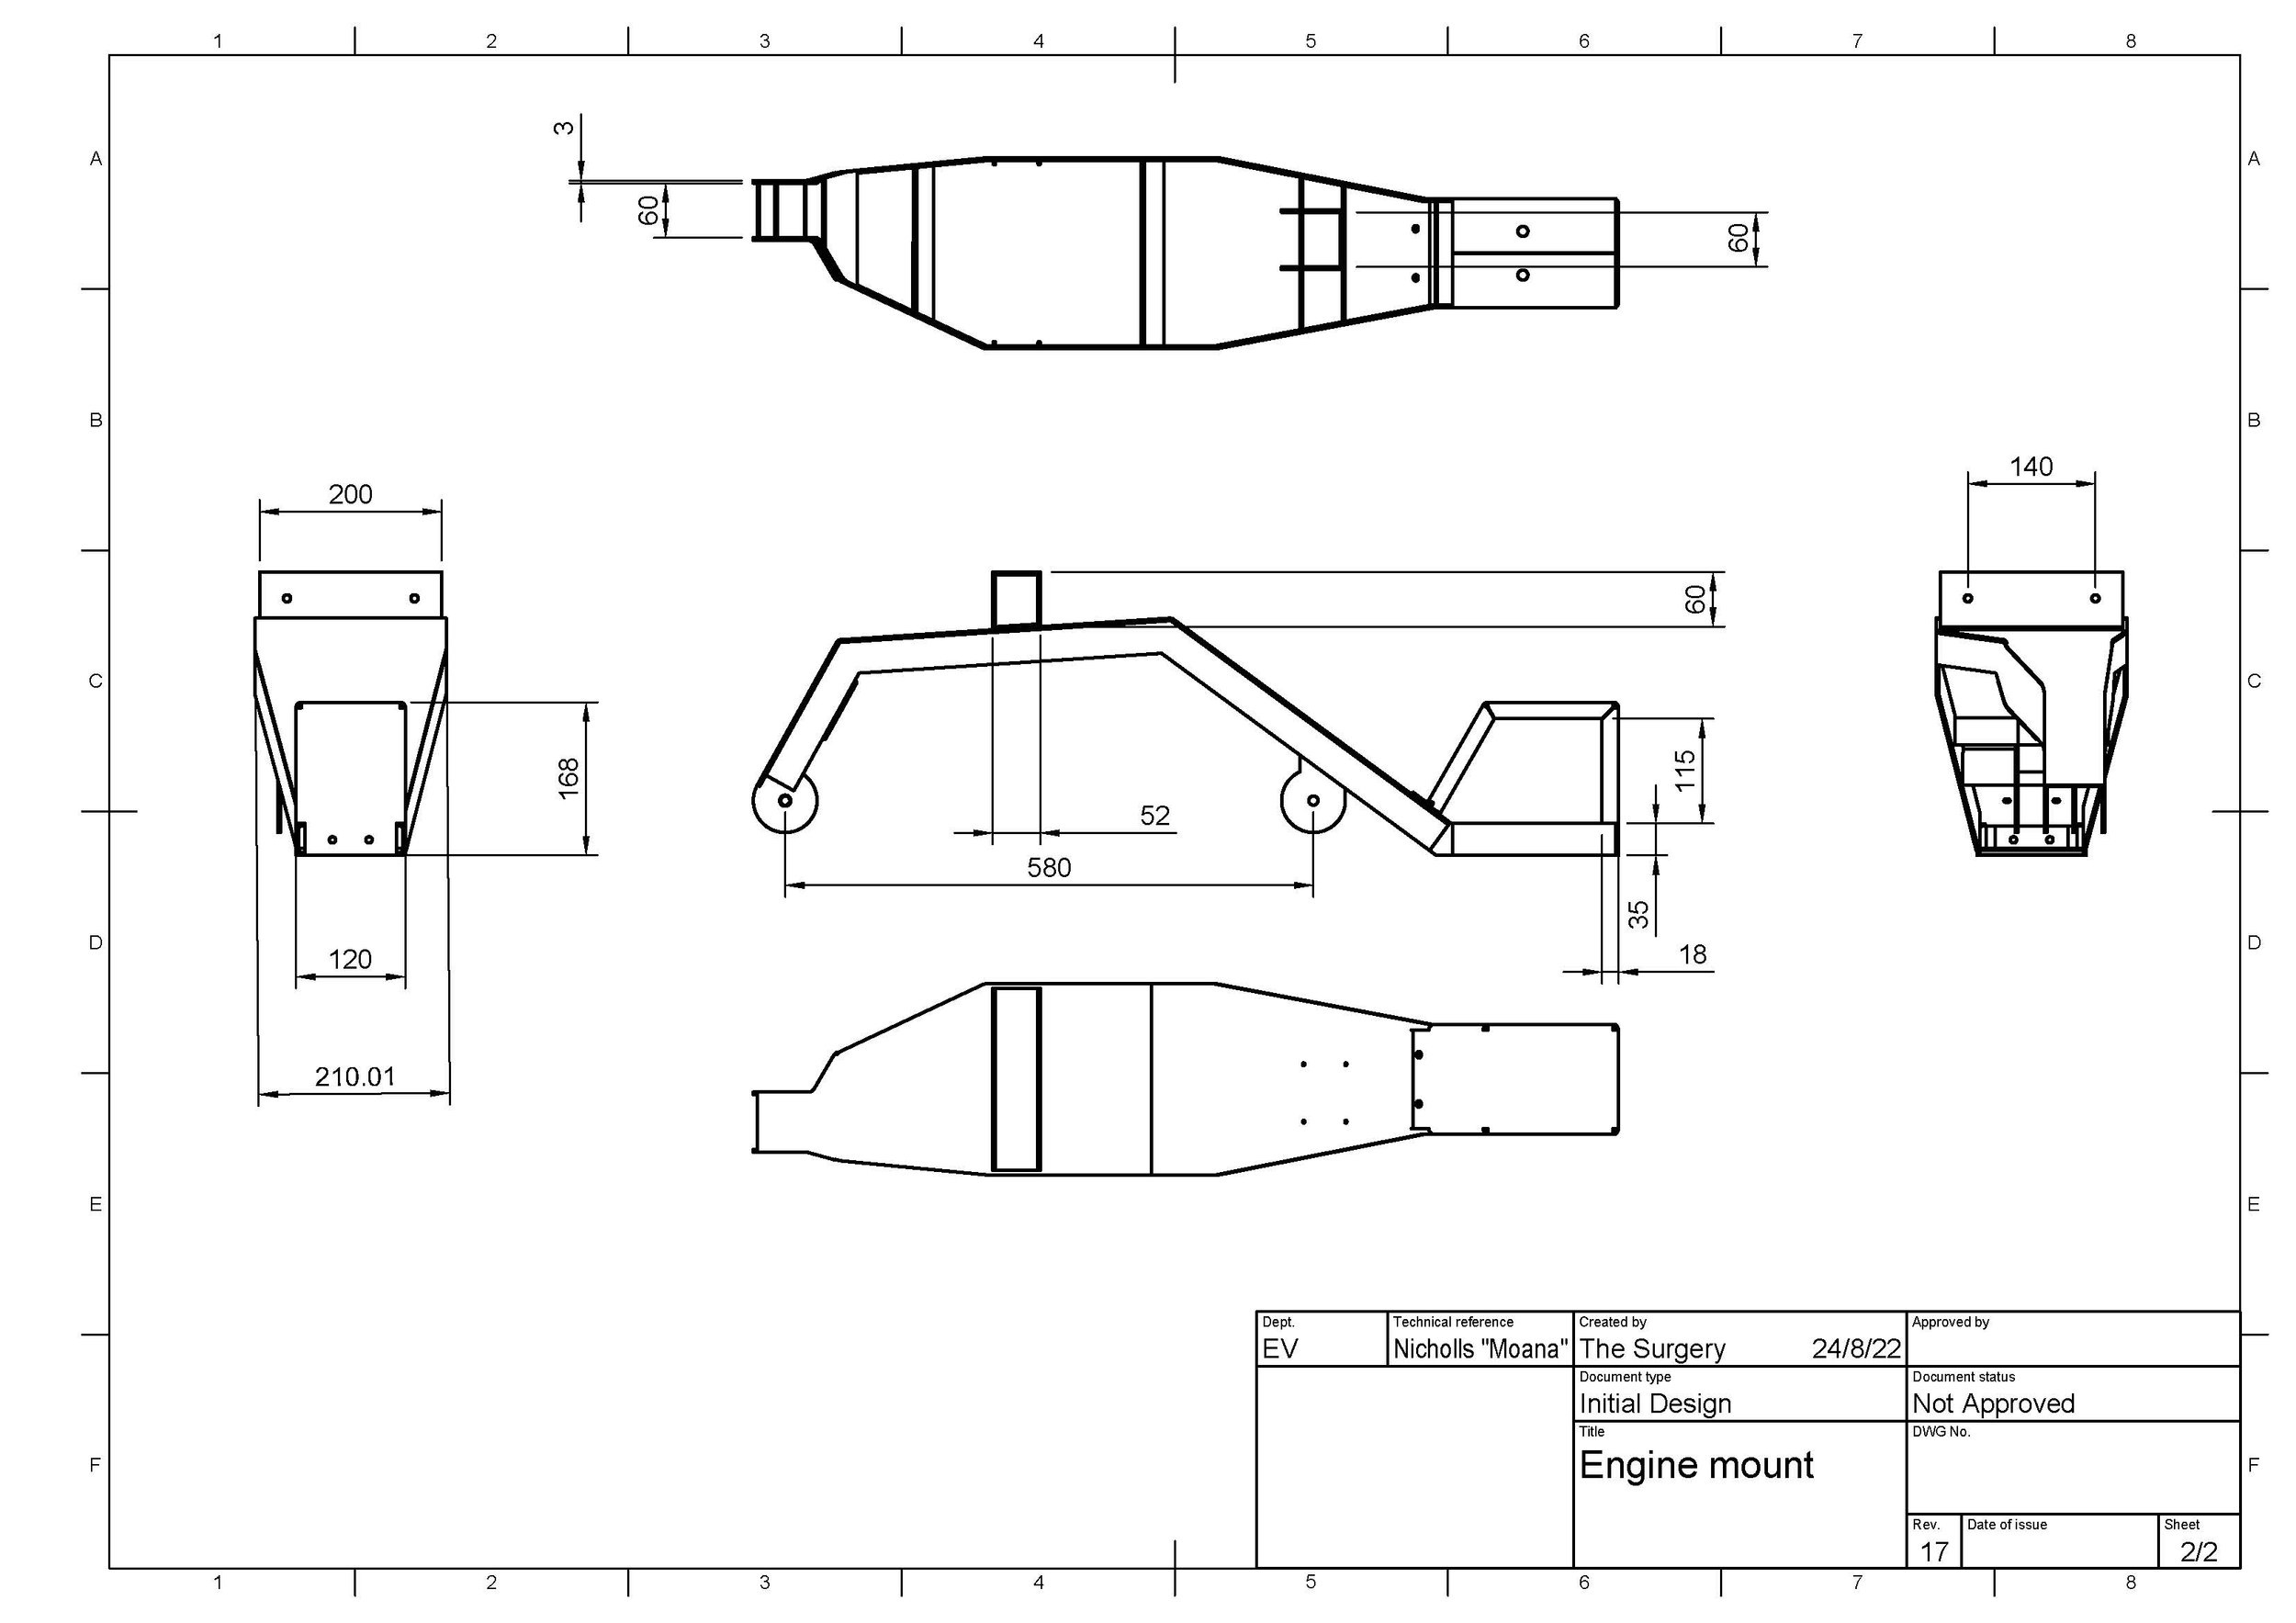 Nicholls %22Moana%22- Engine Mount Dimentioned Drawings v11_Page_2.jpg